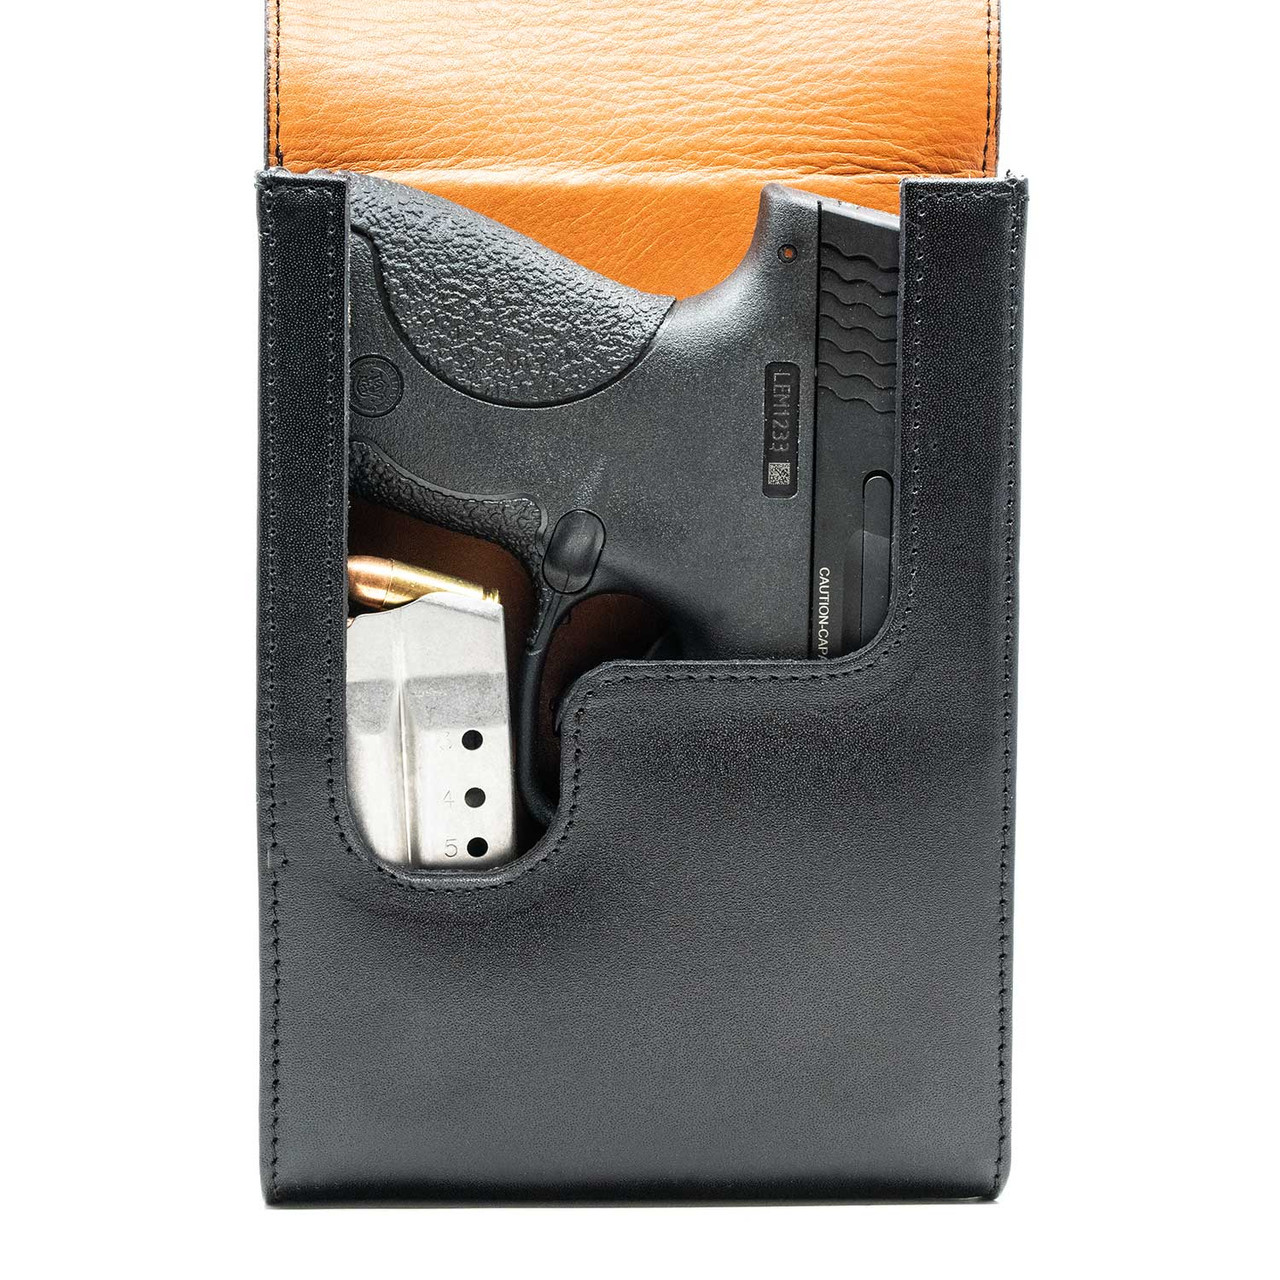 The Remington RM380 Xtra Mag Black Leather Holster